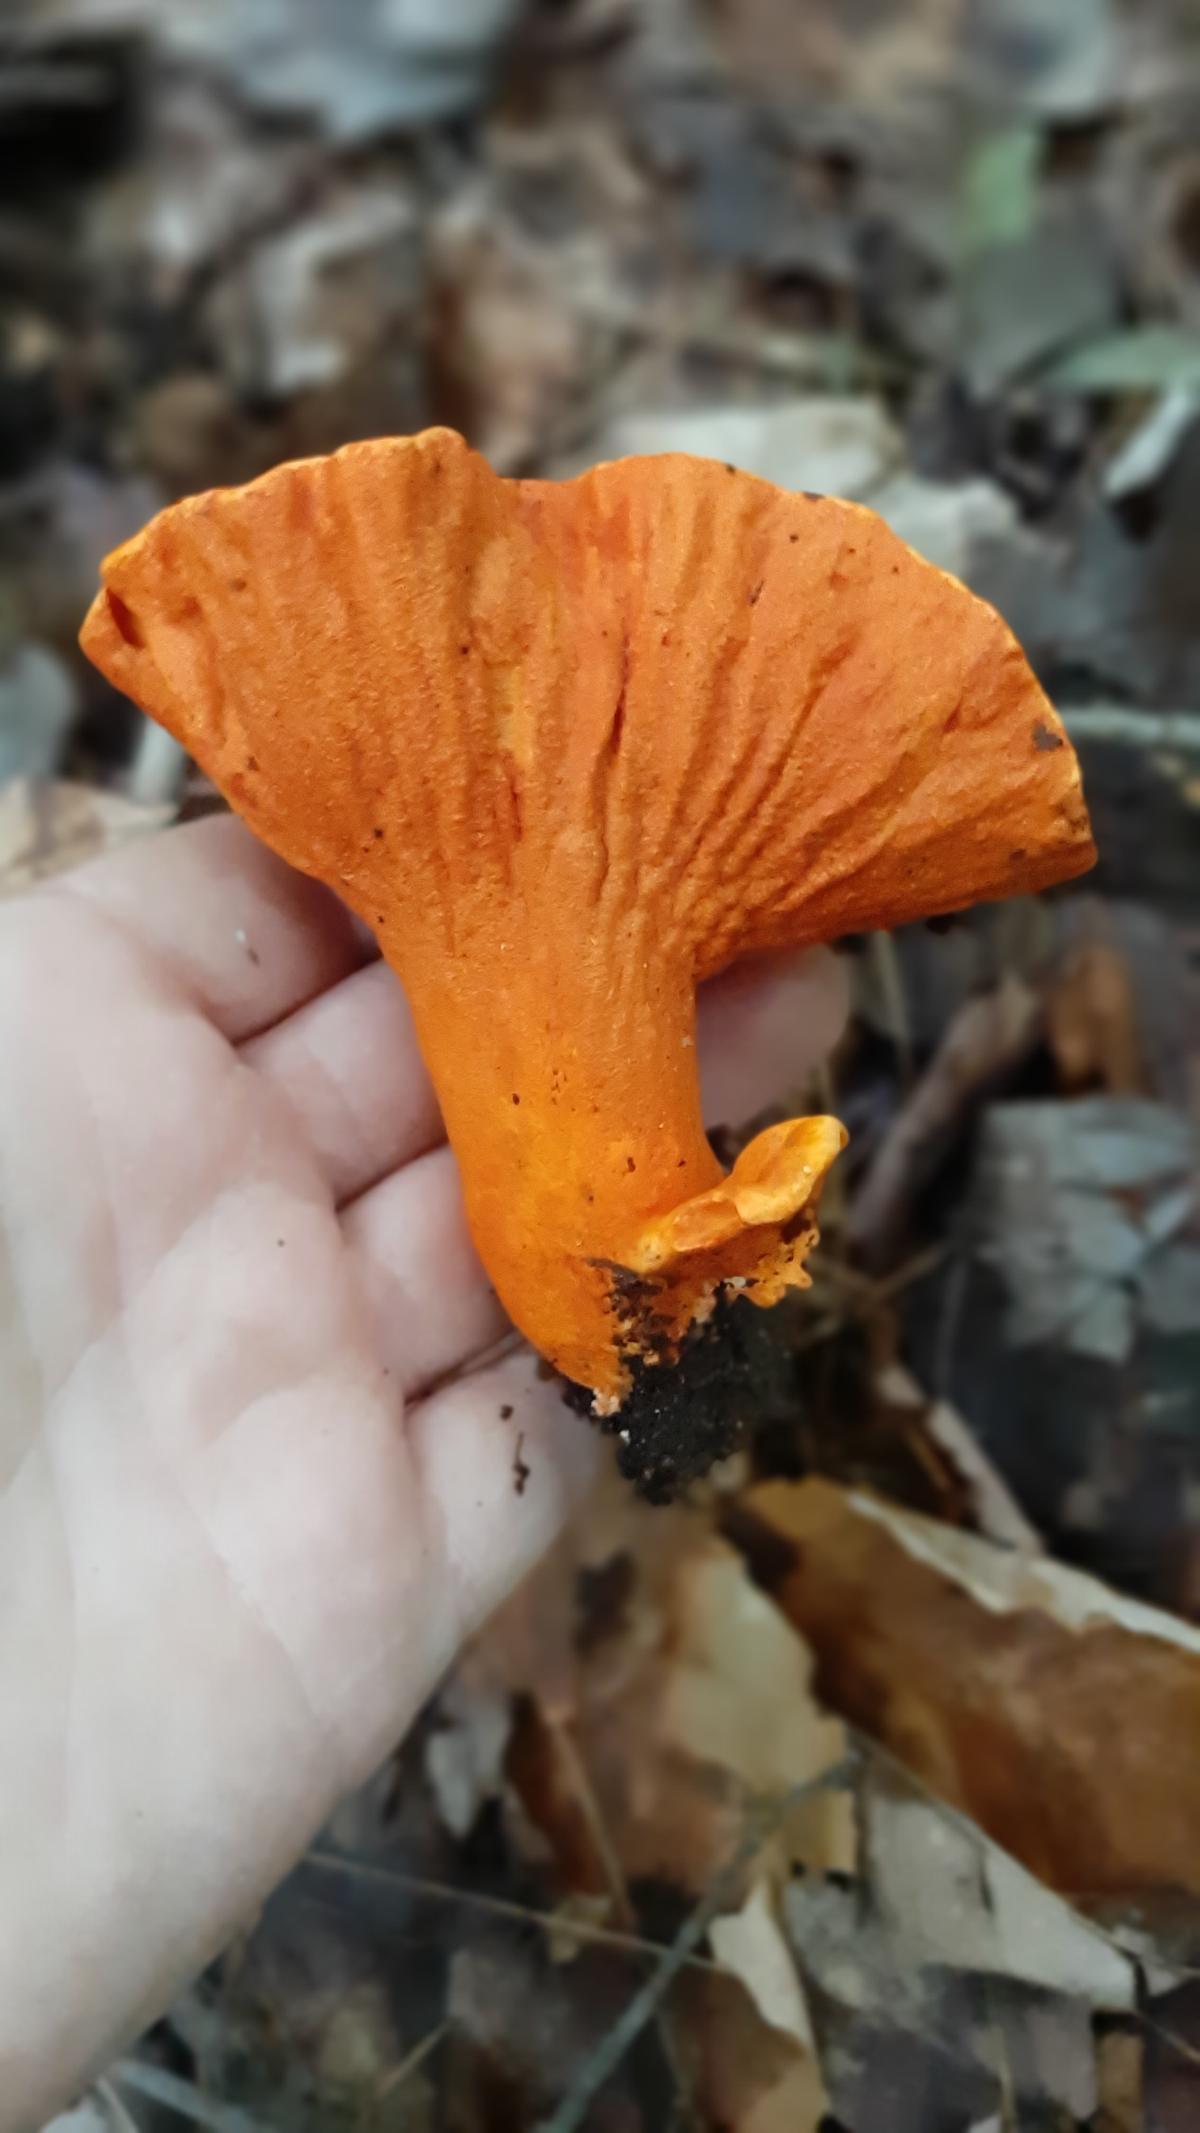 A single large lobster mushroom in a hand